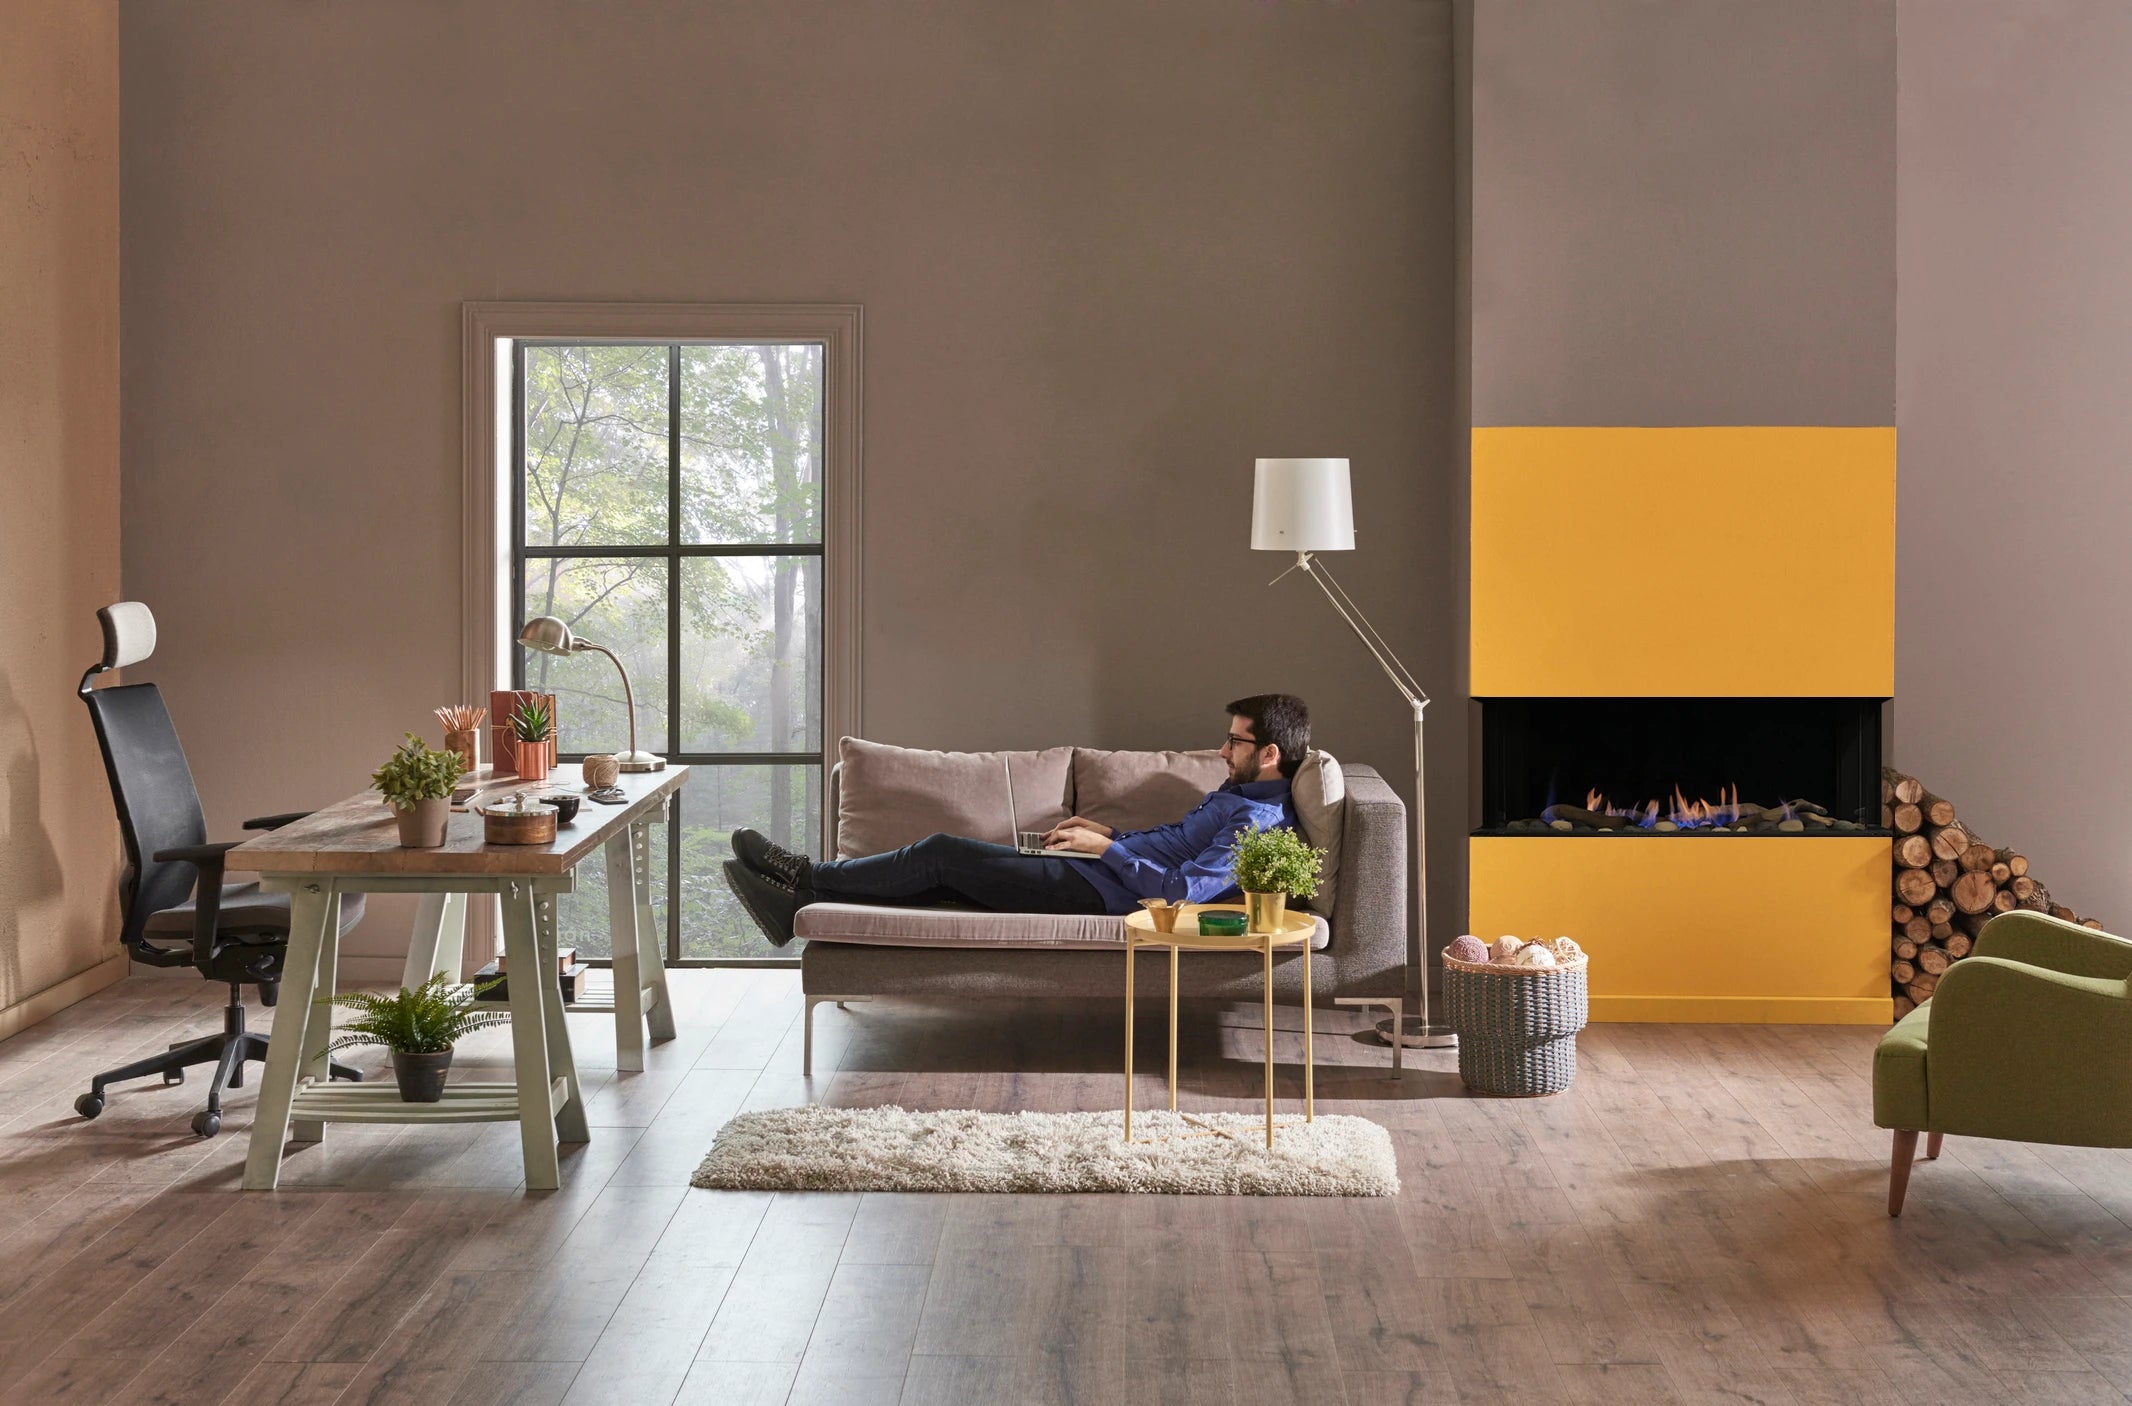 Sierra Flame Toscana Three Sided Natural Gas or Liquid Propane Gas Fireplace- Lifestyle Minimalist Room